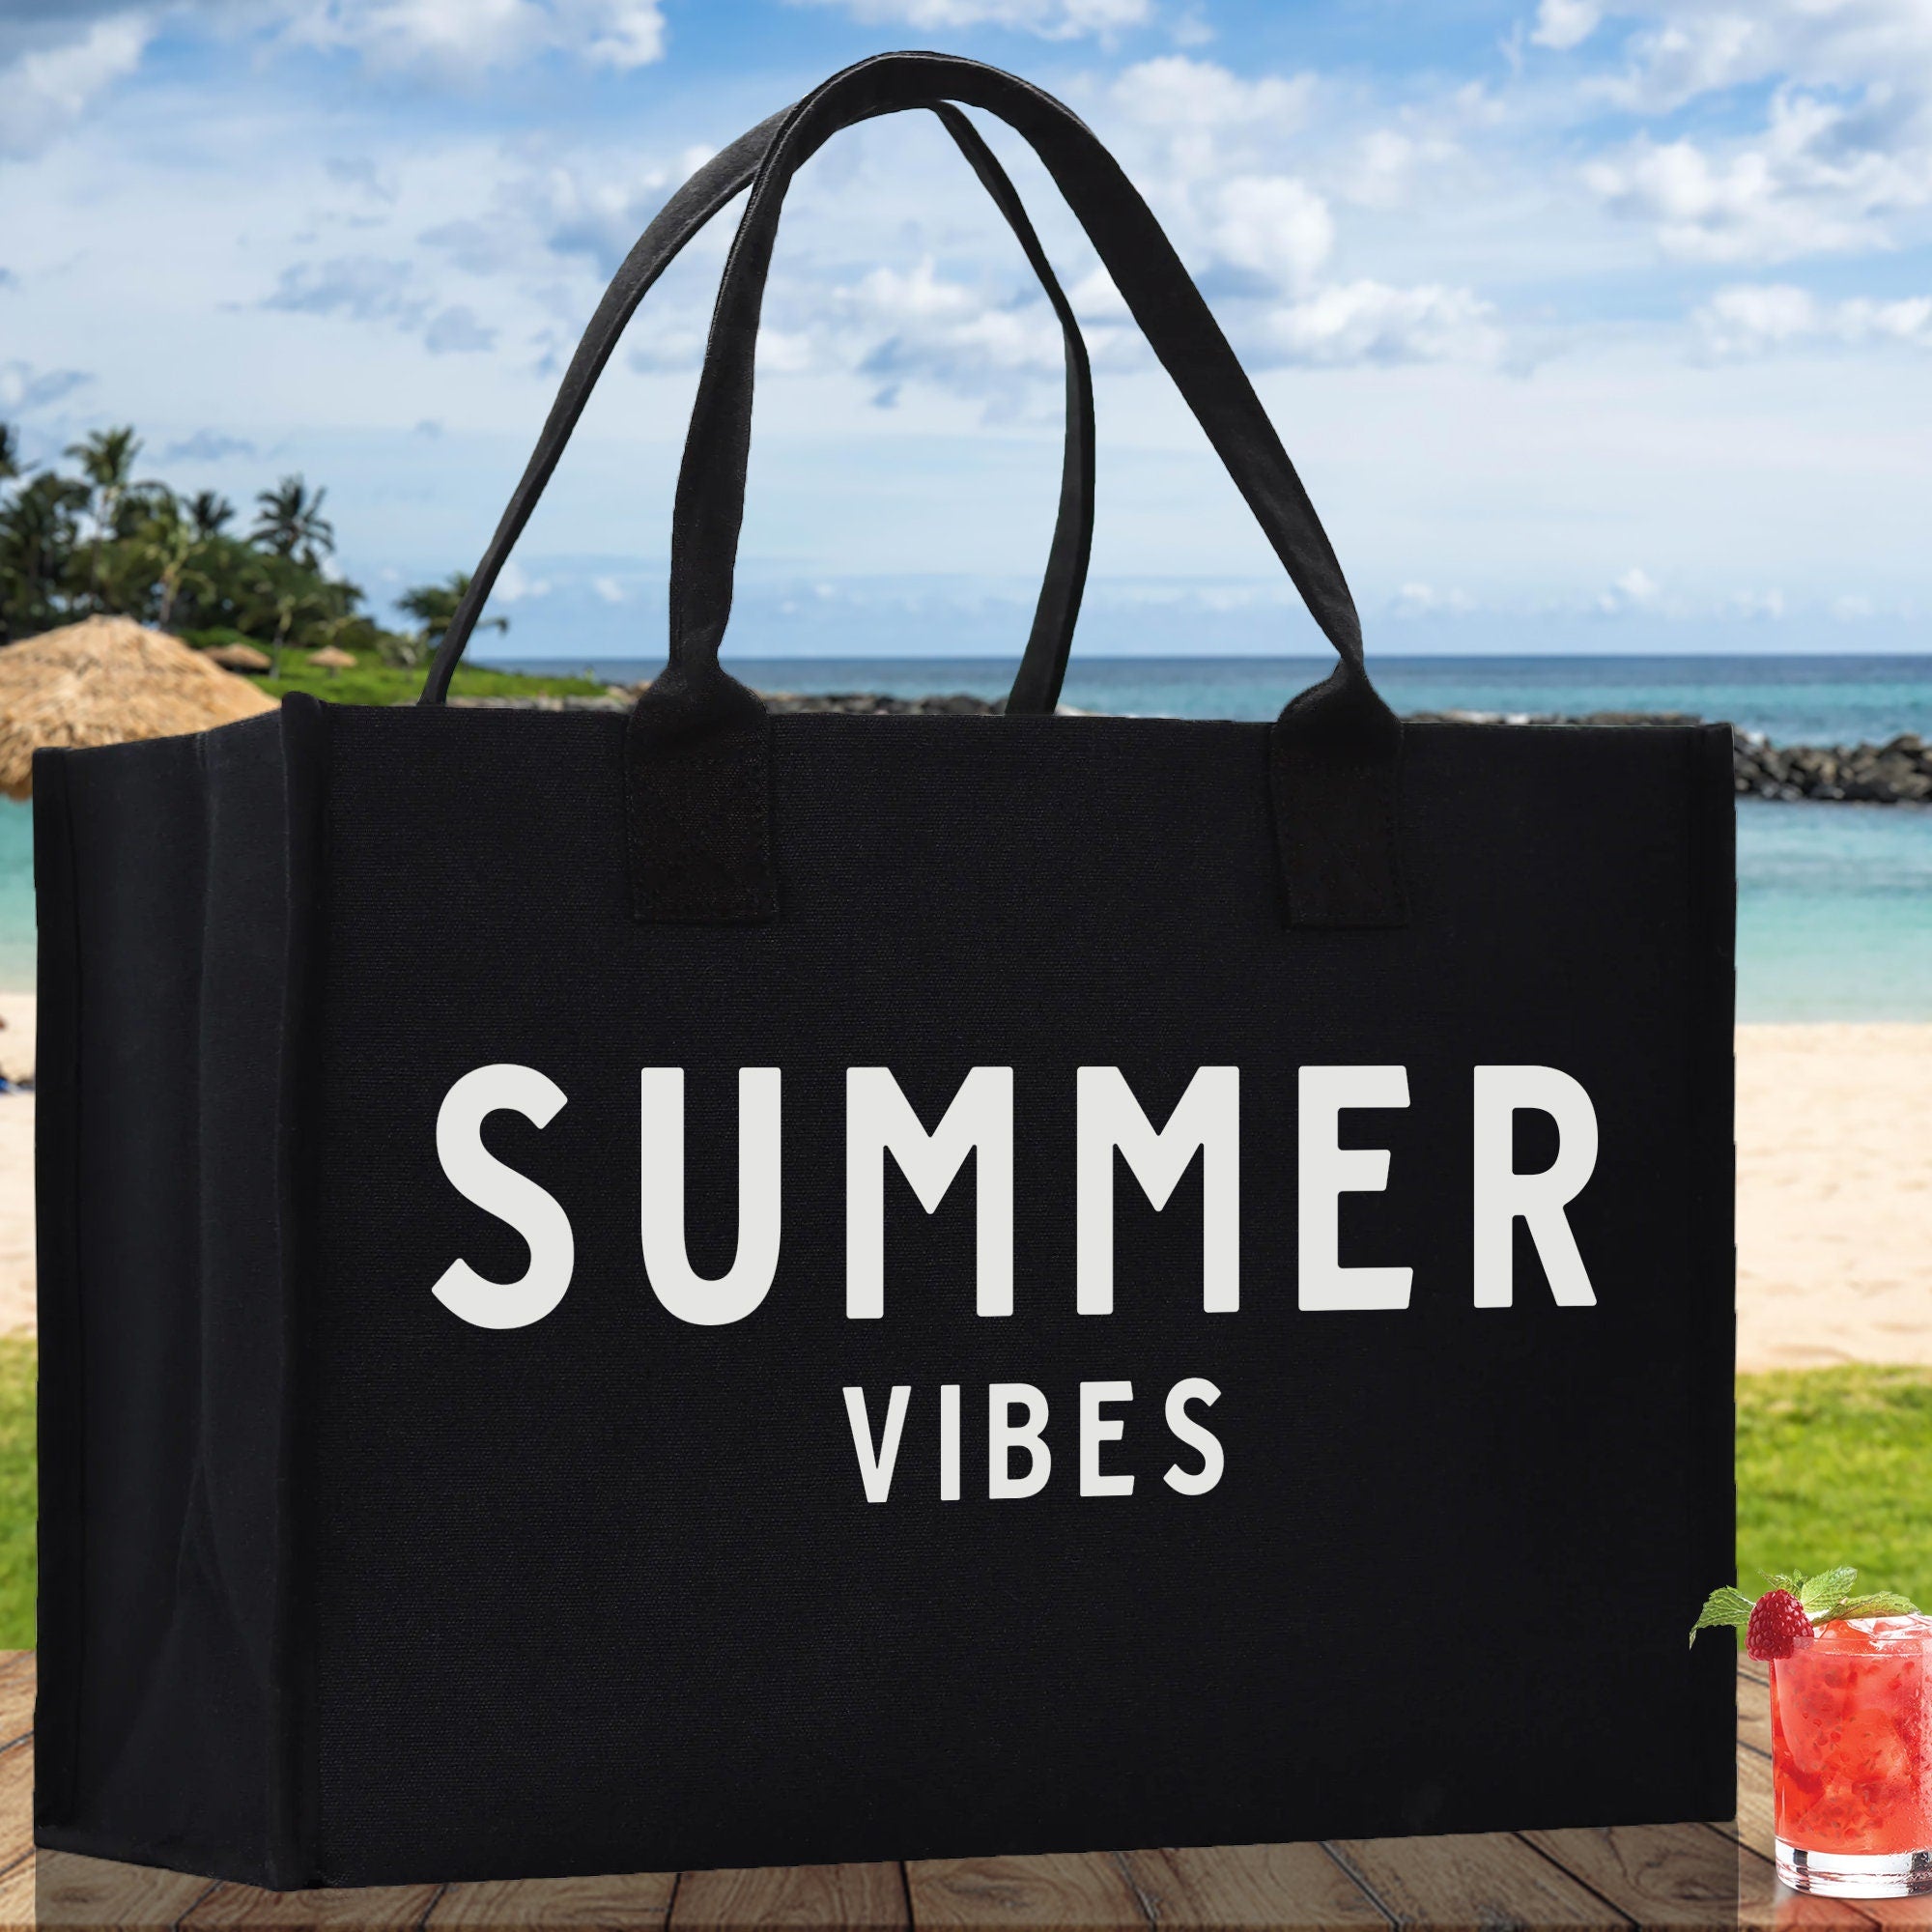 Summer Vibes Cotton Canvas Chic Beach Tote Bag Multipurpose Tote Weekender Tote Gift for Her Outdoor Tote Vacation Tote Large Beach Bag